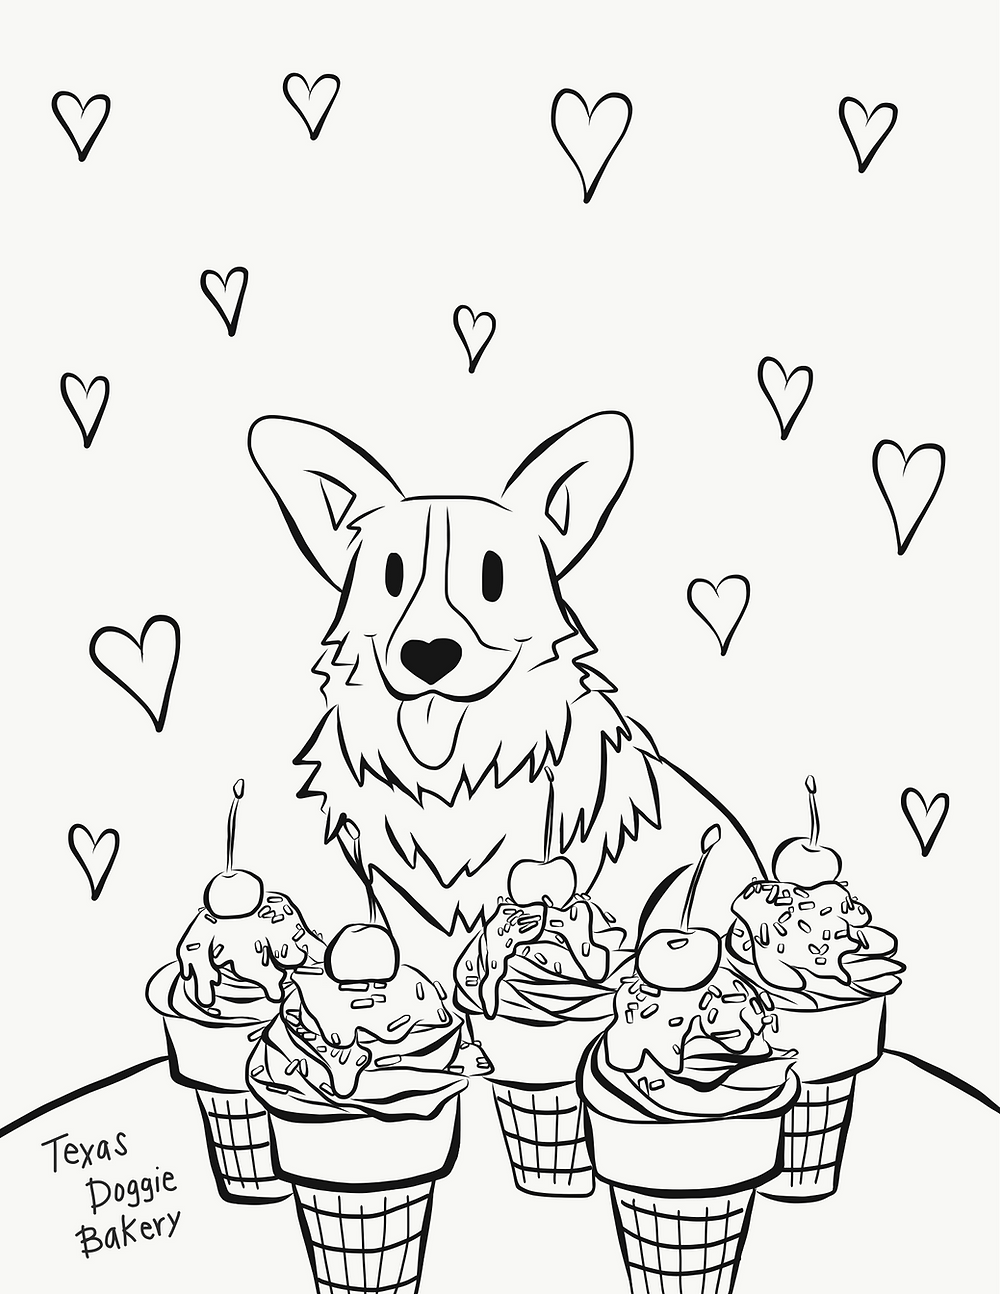 Free Printable Corgi Coloring Page From Texas Doggie Bakery Coloring Home